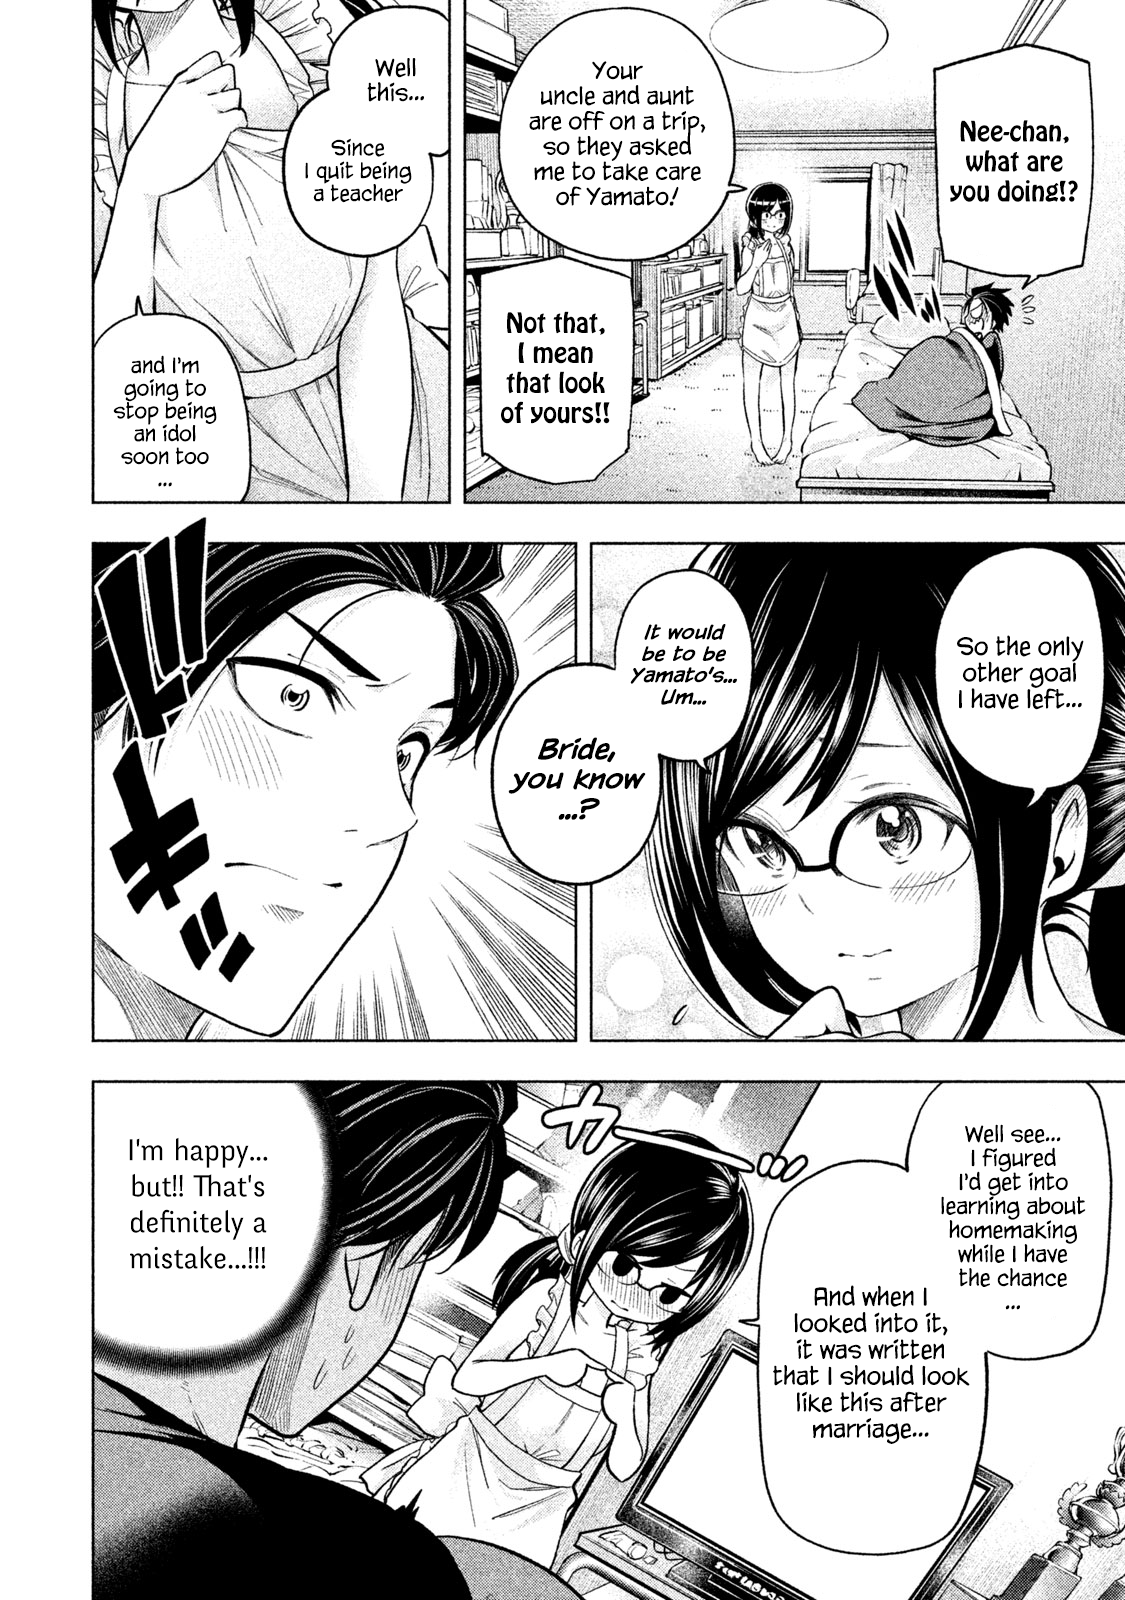 Why Are You Here Sensei!? - Page 2